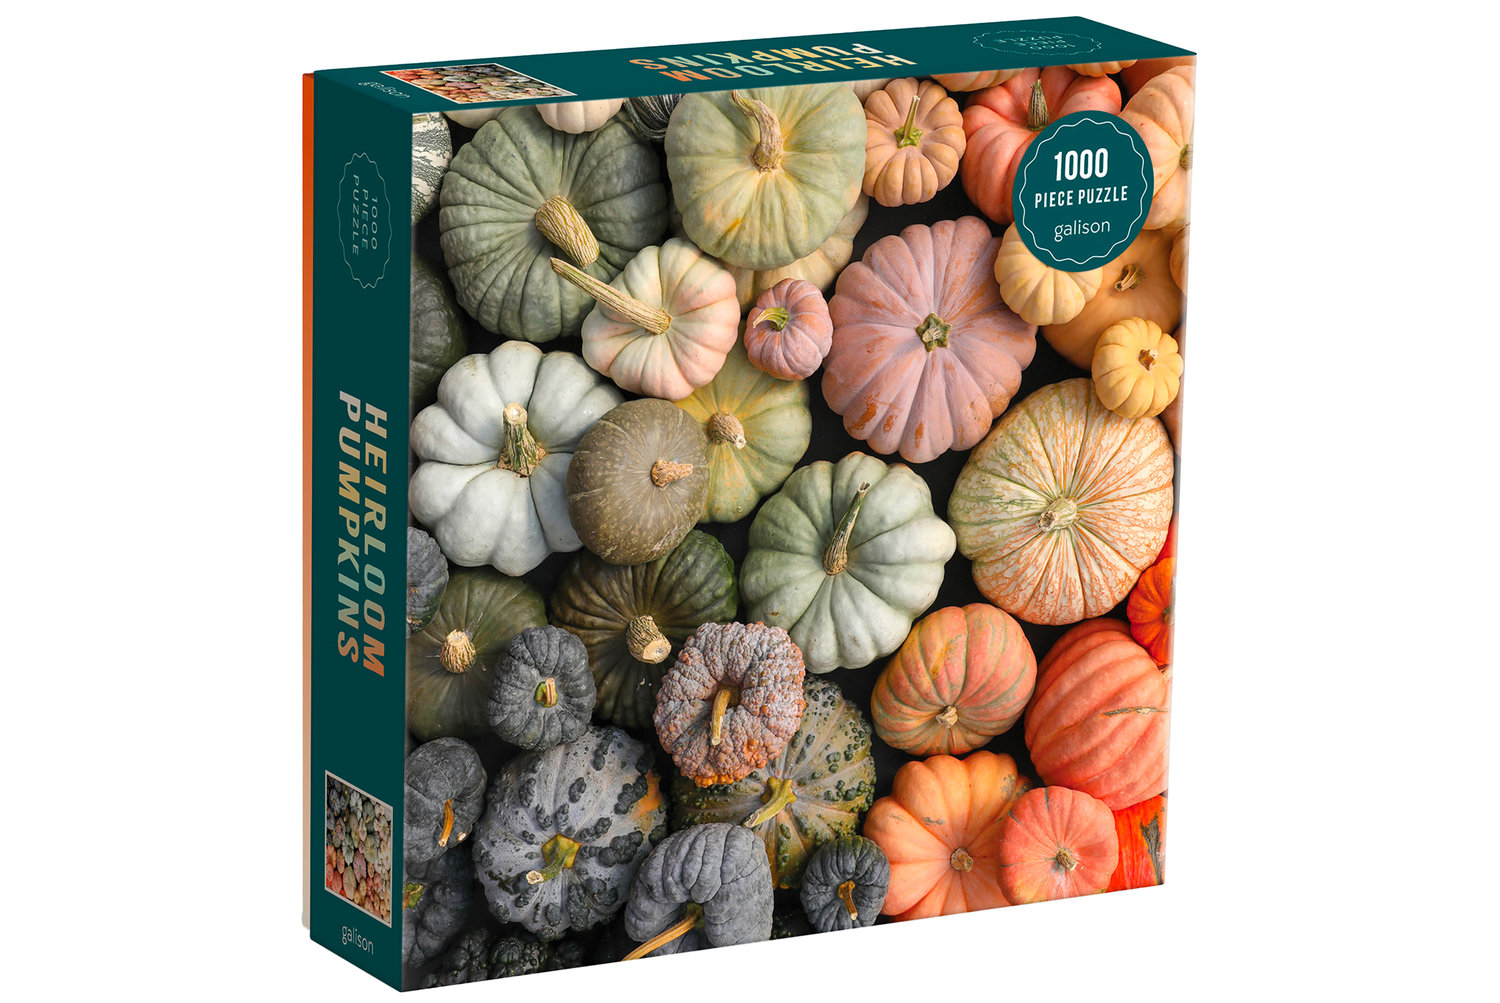 Heirloom Pumpkins 1000 Piece Puzzle by Galison, packaged in a matte-finish sturdy box, with insert of the full puzzle image included.